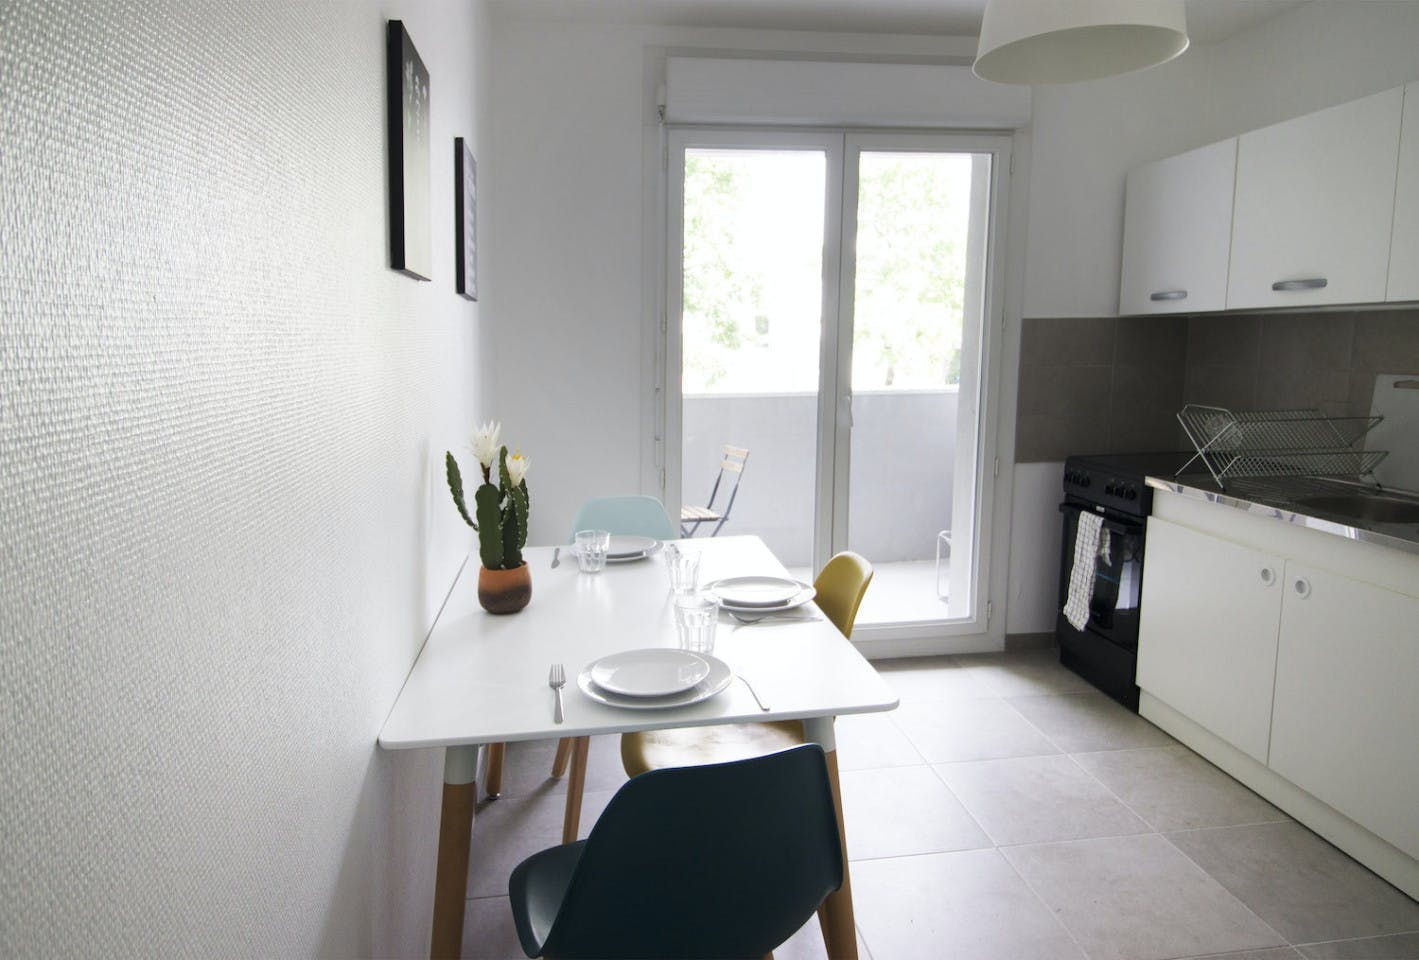 Spacious apartment furnished with care in the center of Grenoble